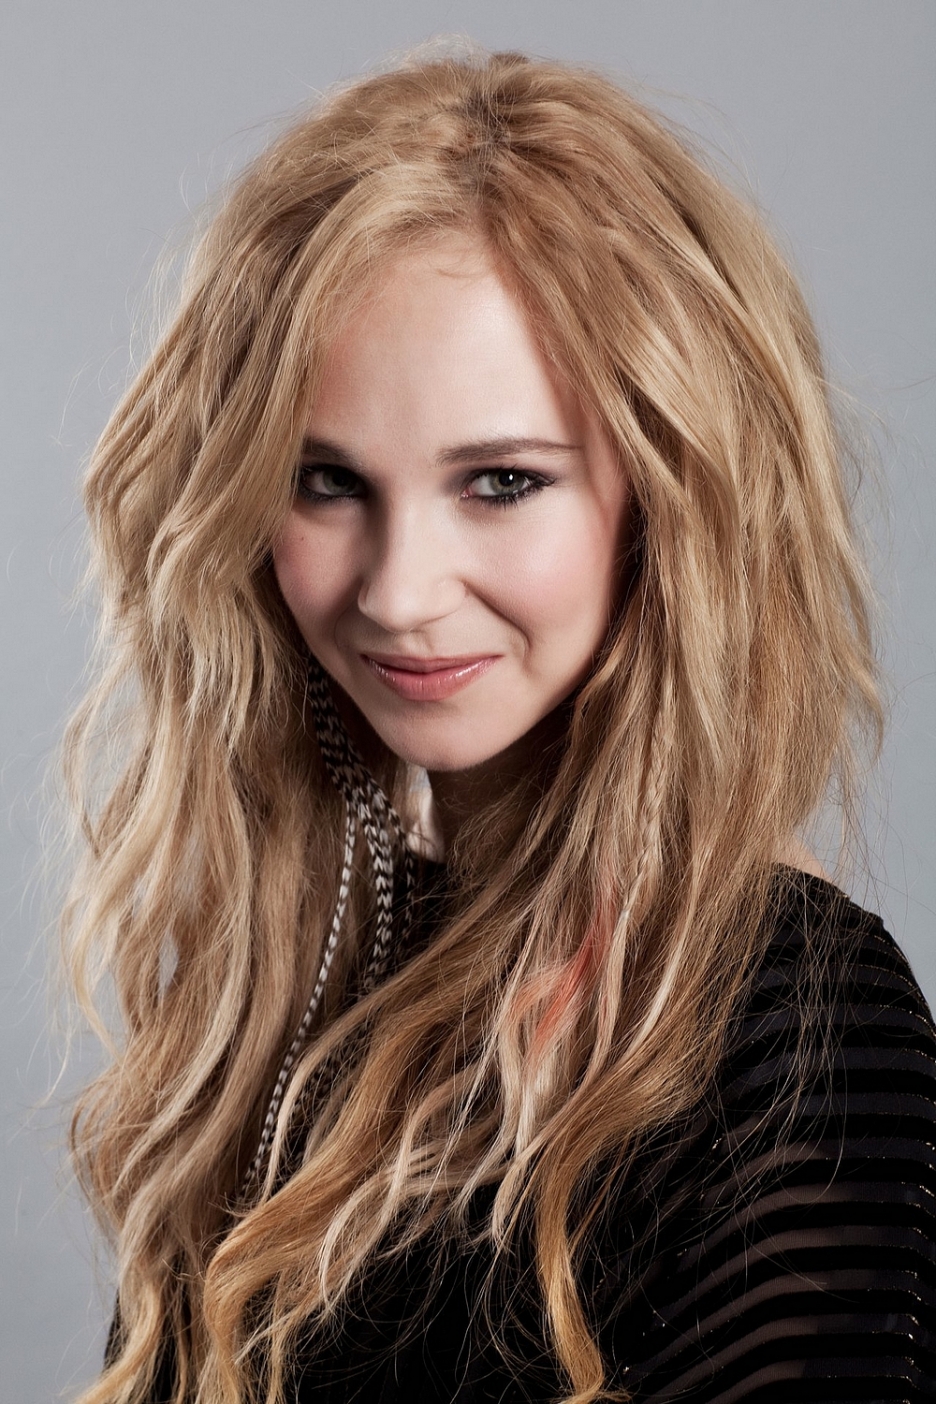 HQ Juno Temple Wallpapers | File 958.77Kb